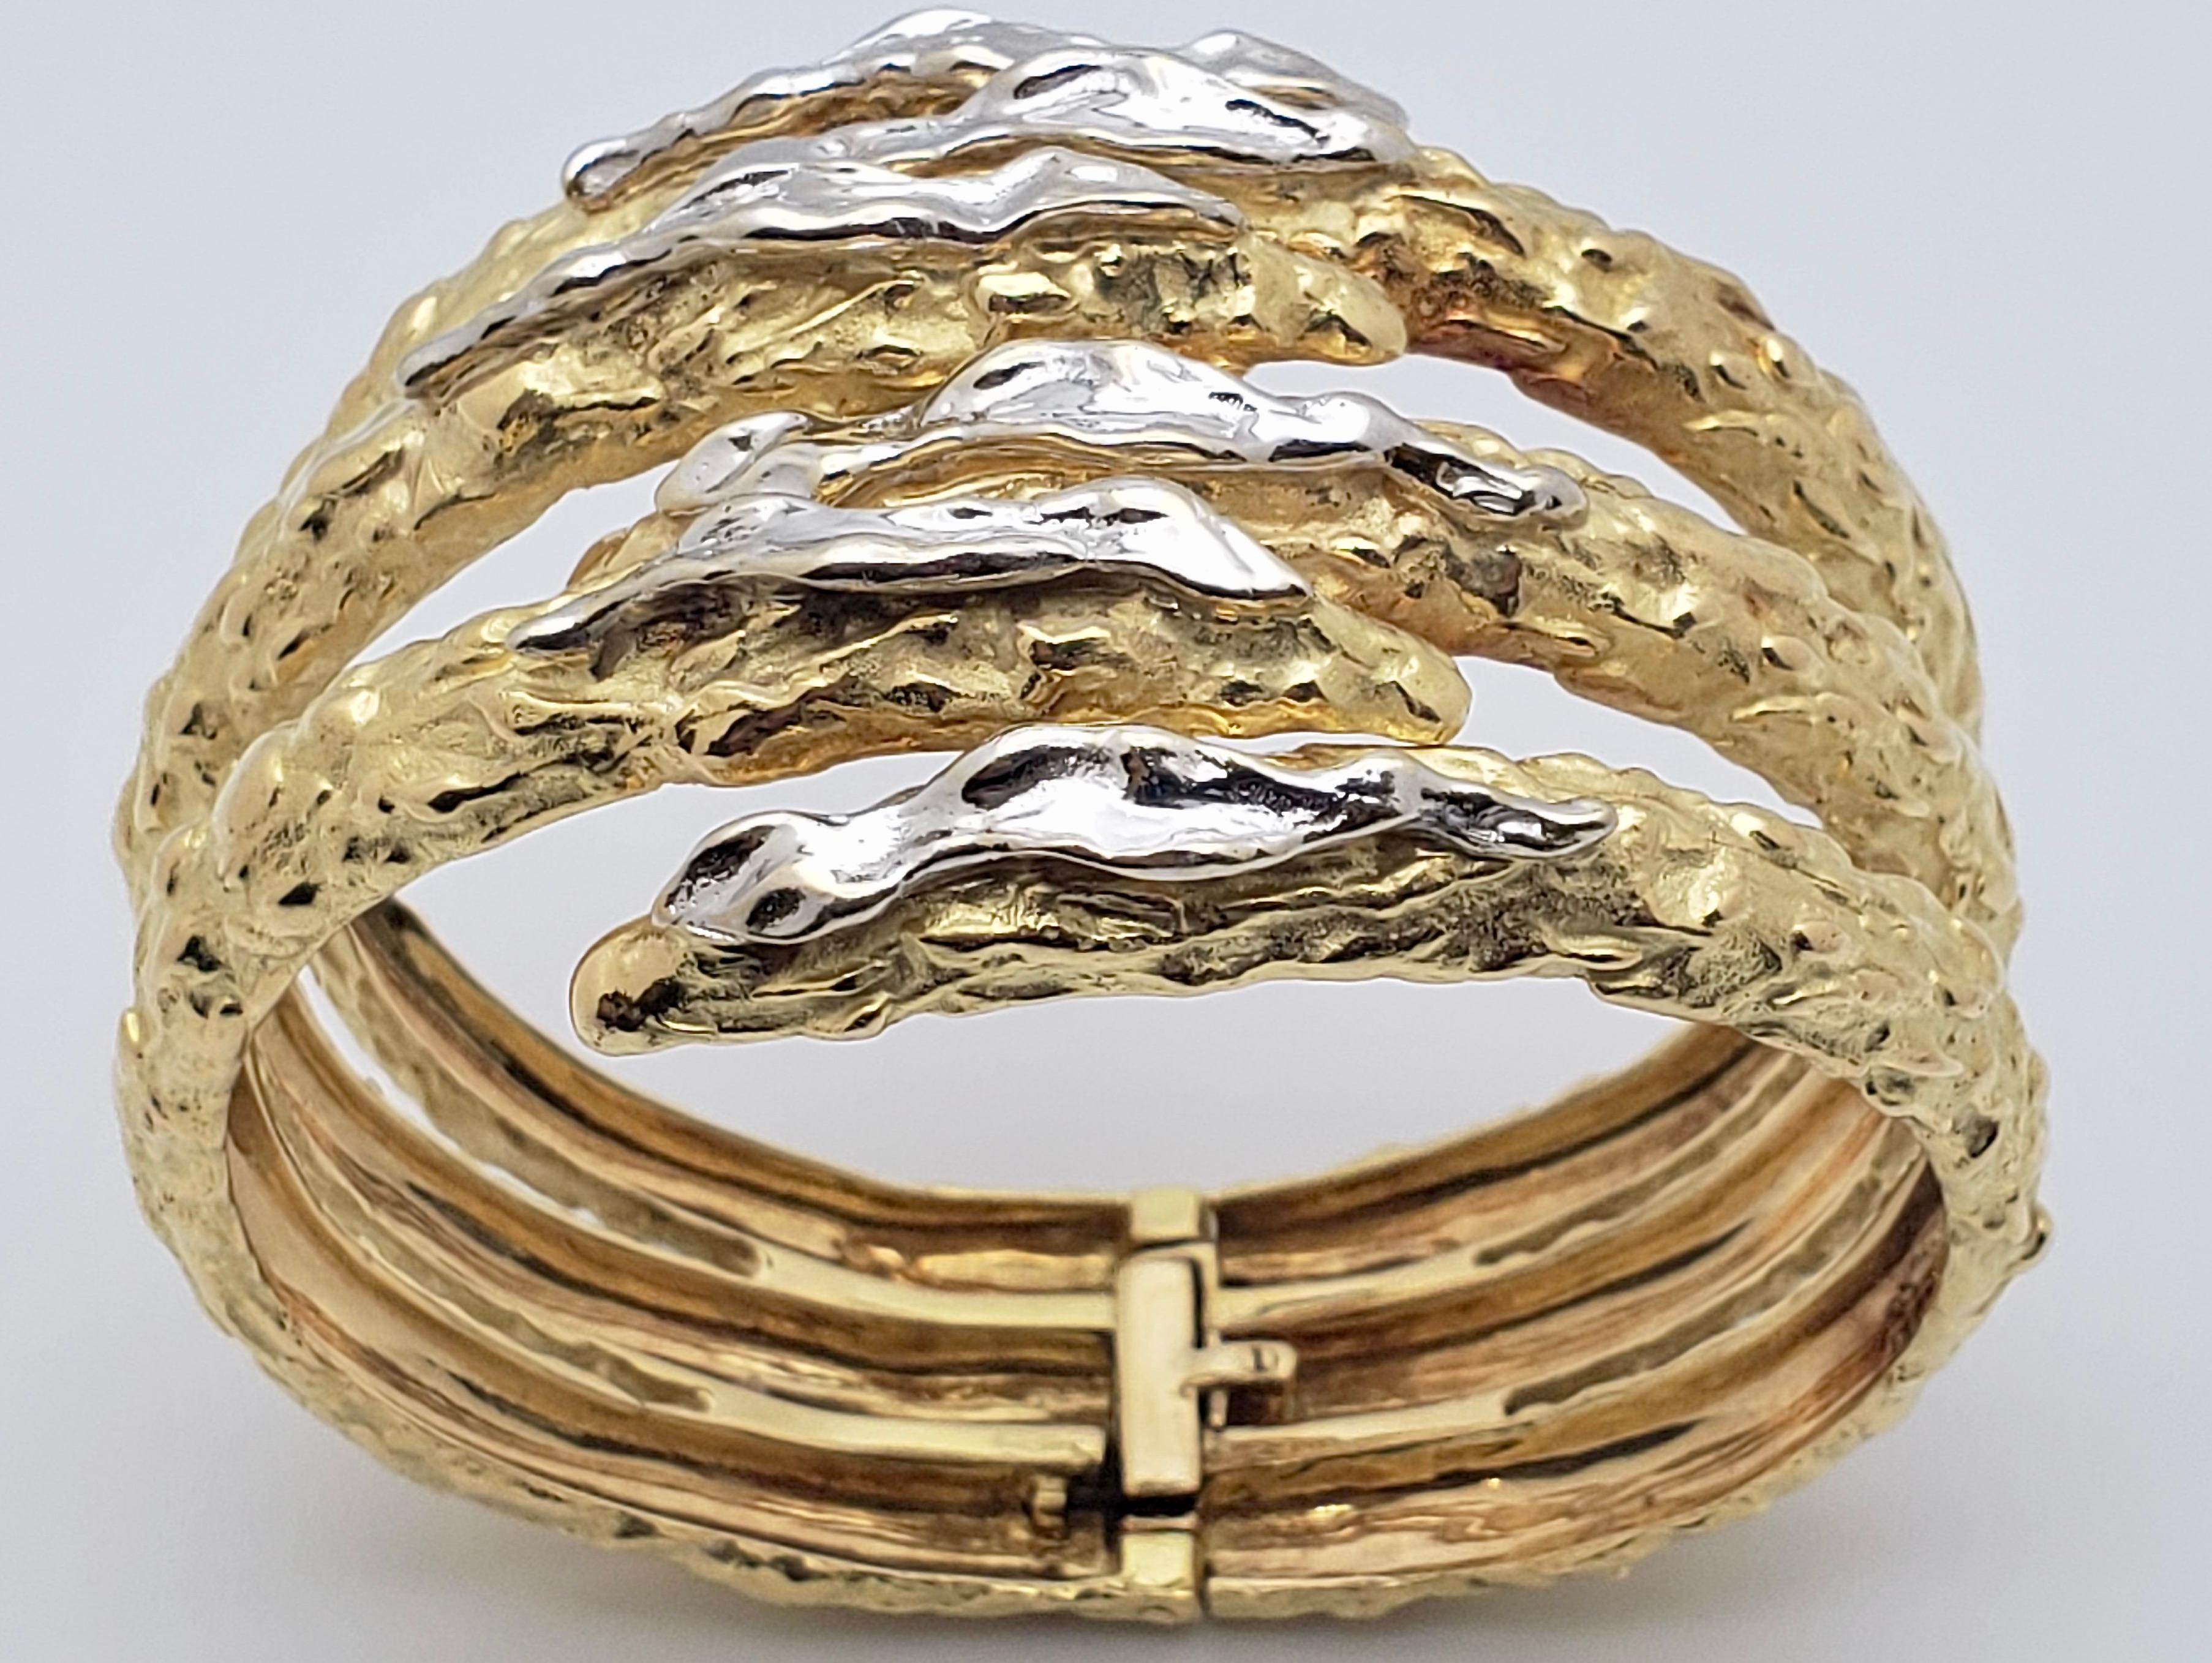 An extraordinary 18K yellow and white gold cuff claw snake bracelet. Circa 1960's, it features a one of a kind hammer gold finish, with the strokes of white gold on the front of the claws creating a vibrant contrast. This beautiful bracelet has been